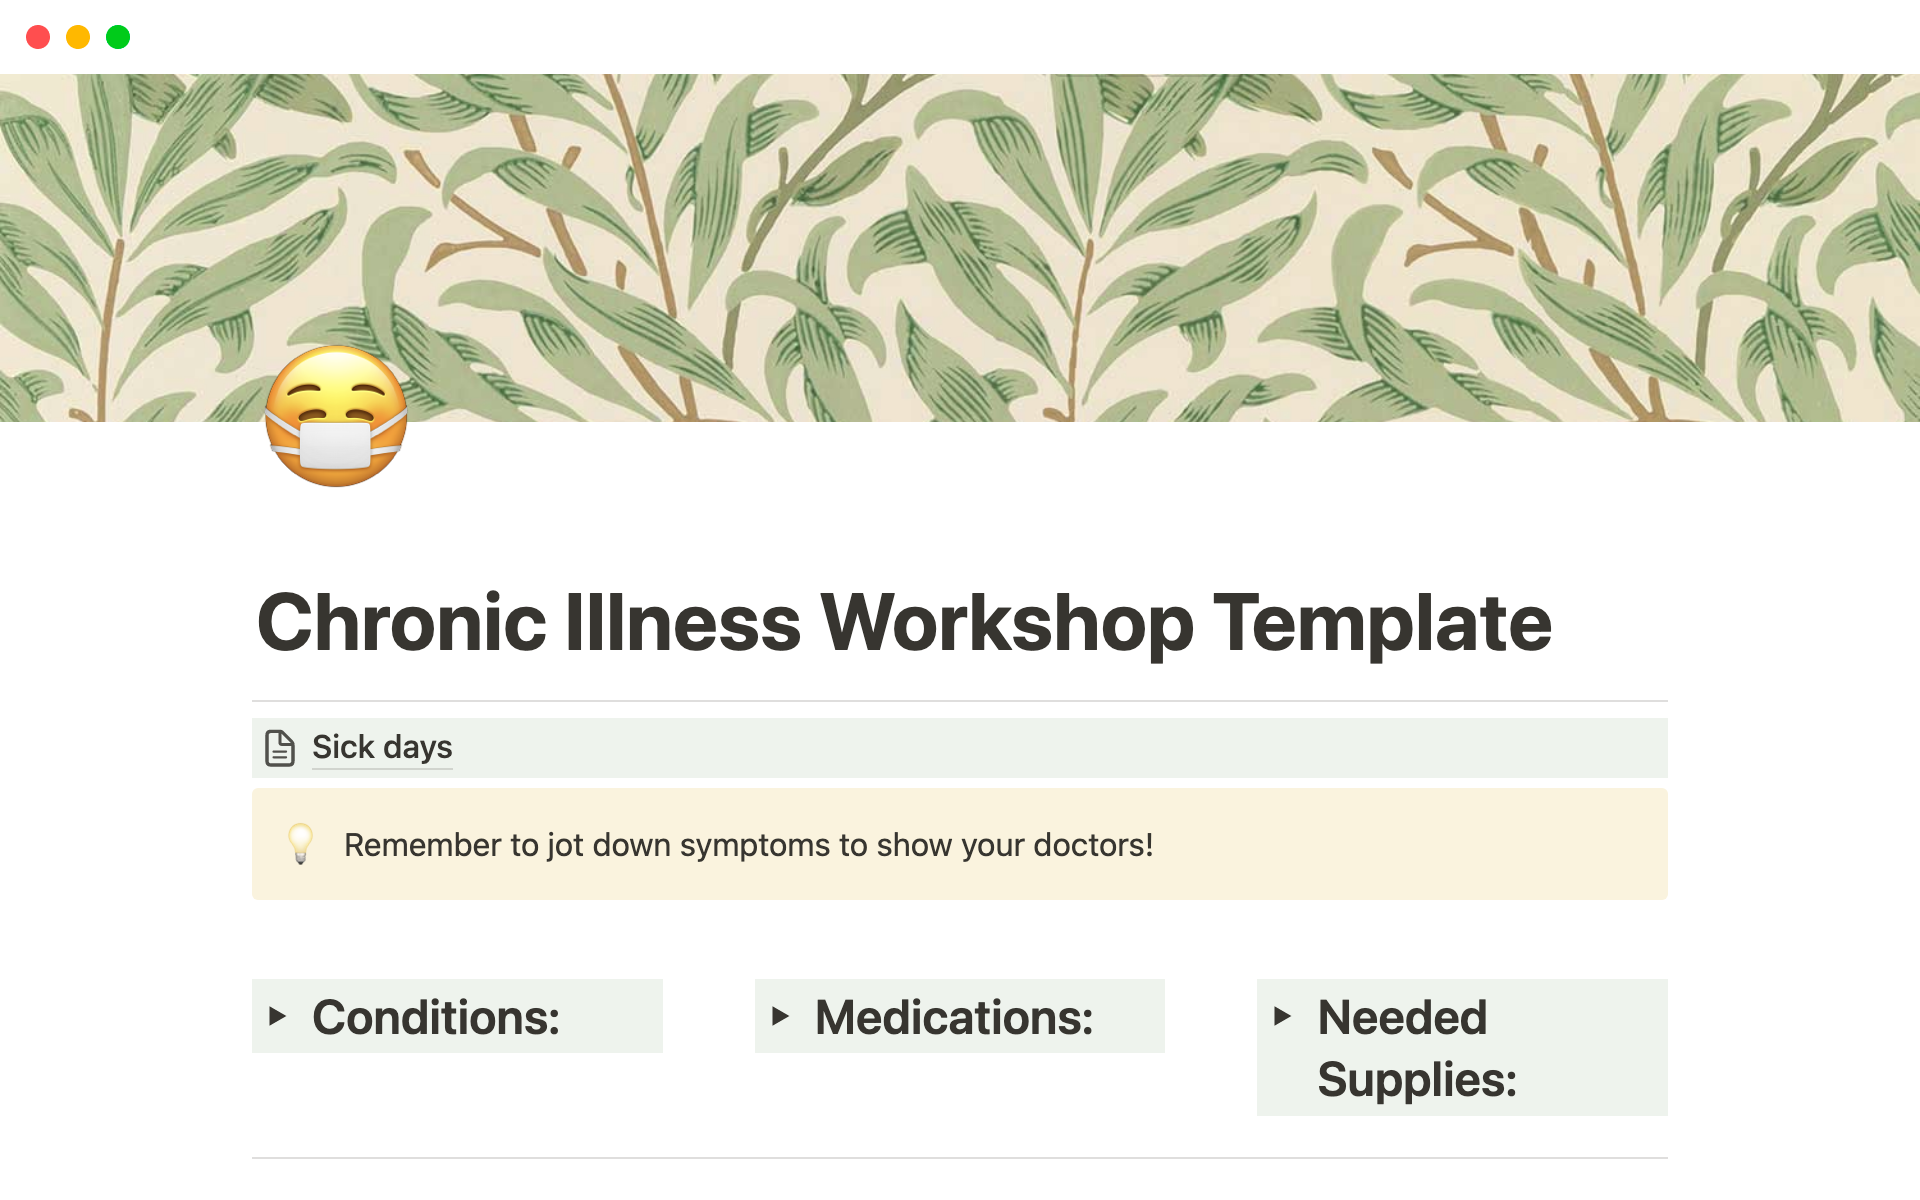 This template allows you to organize and manage prescriptions, doctors, illnesses, symptoms, and track symptoms and flare days.